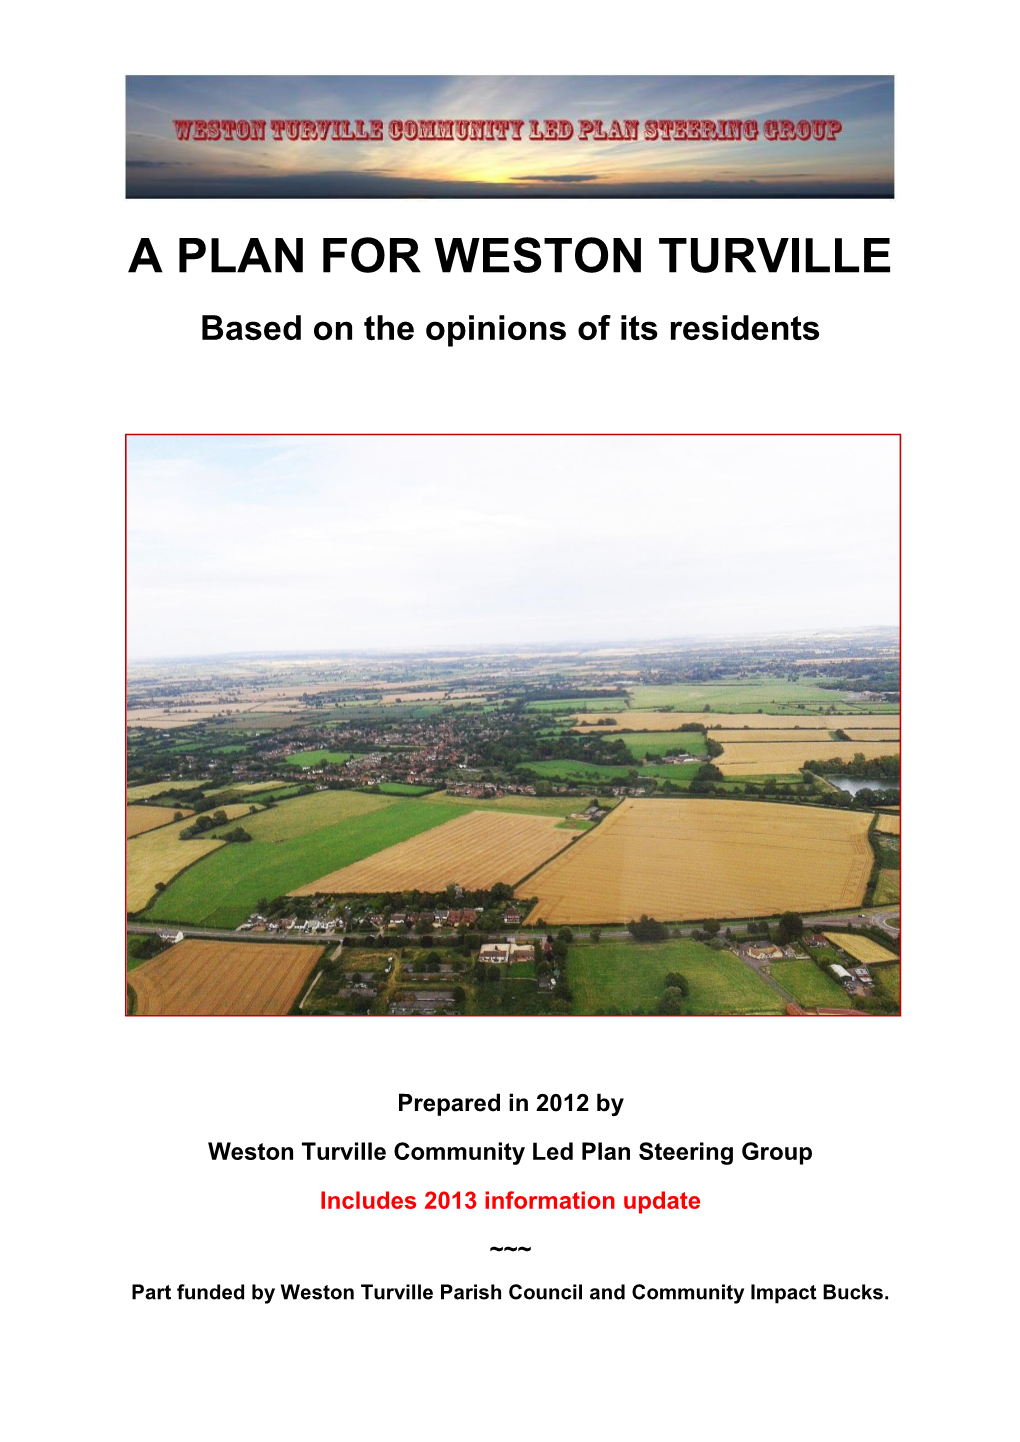 A PLAN for WESTON TURVILLE Based on the Opinions of Its Residents